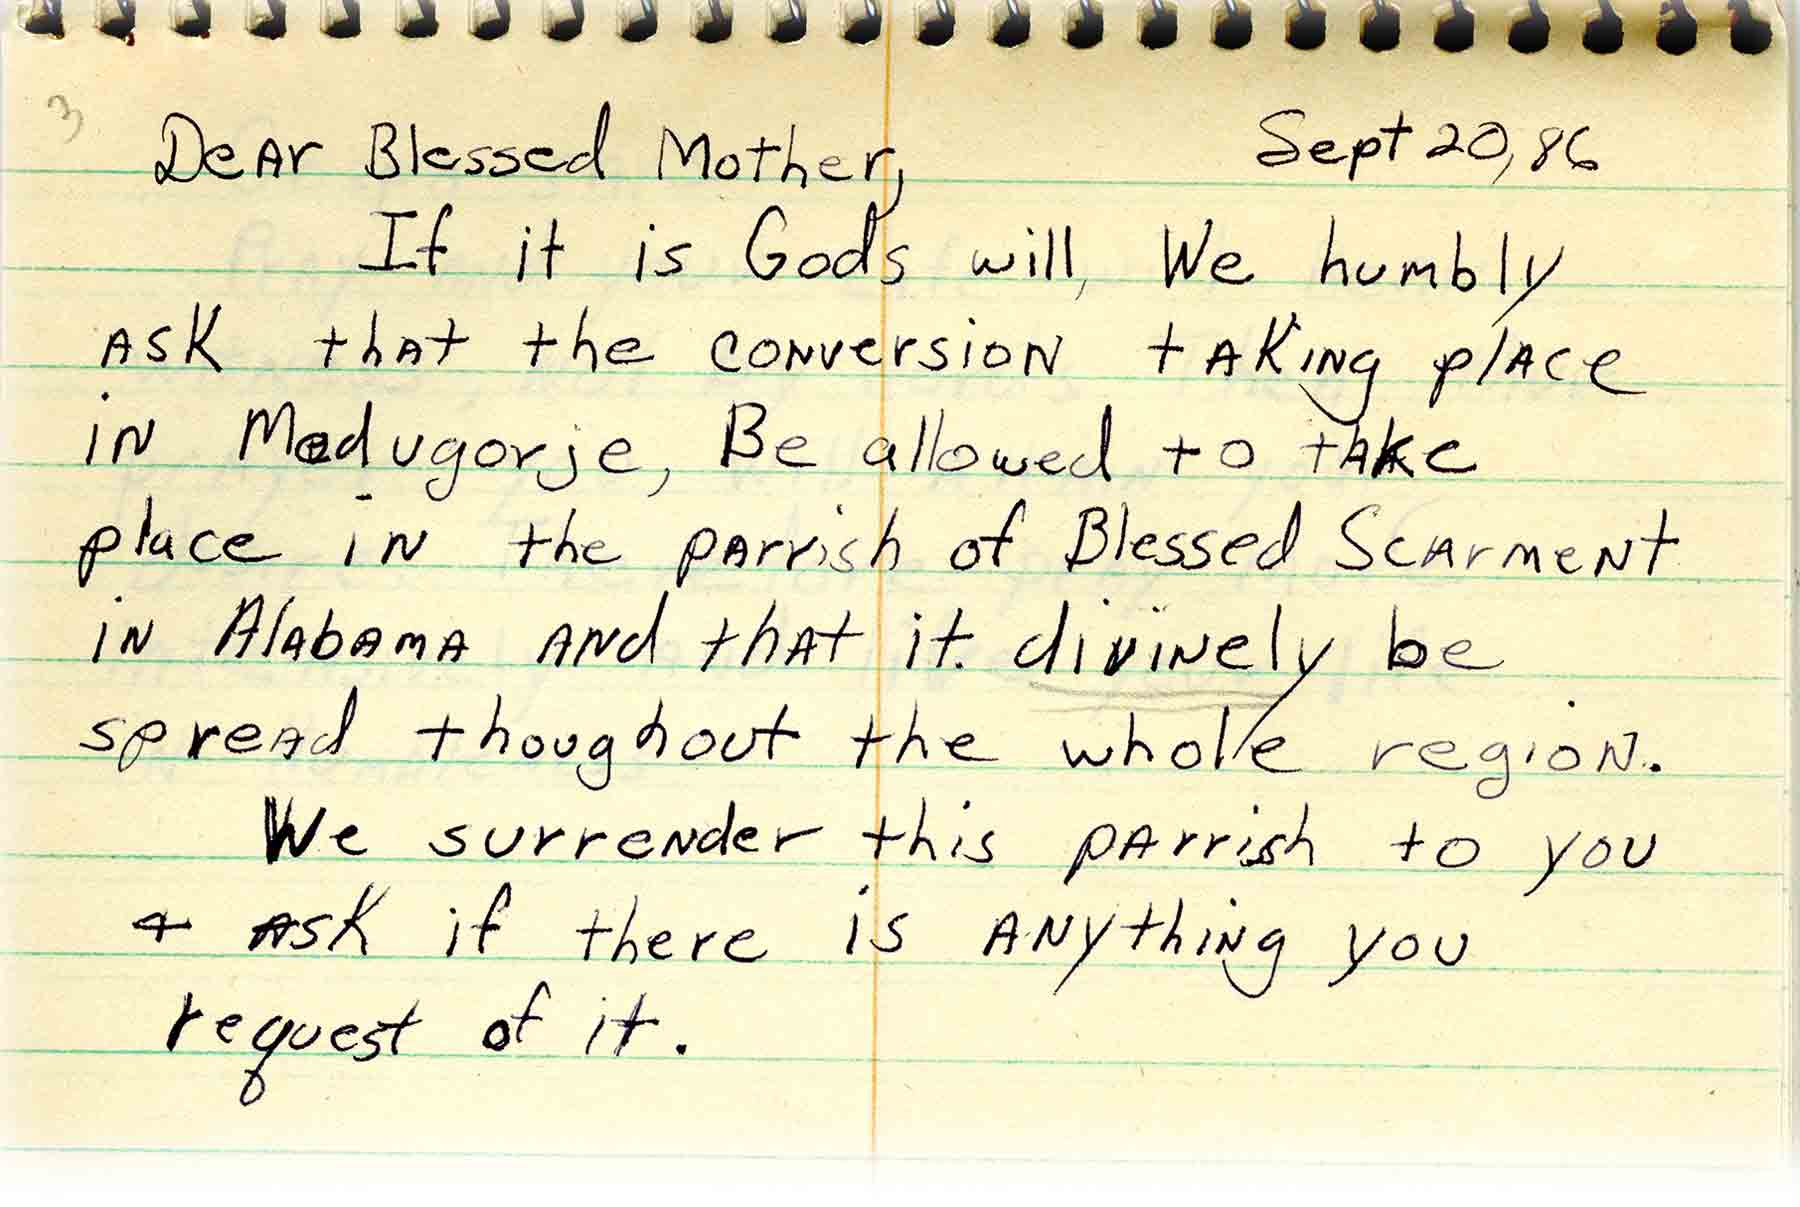 A Friend of Medjugorje's Question to Our Lady September 20, 1986